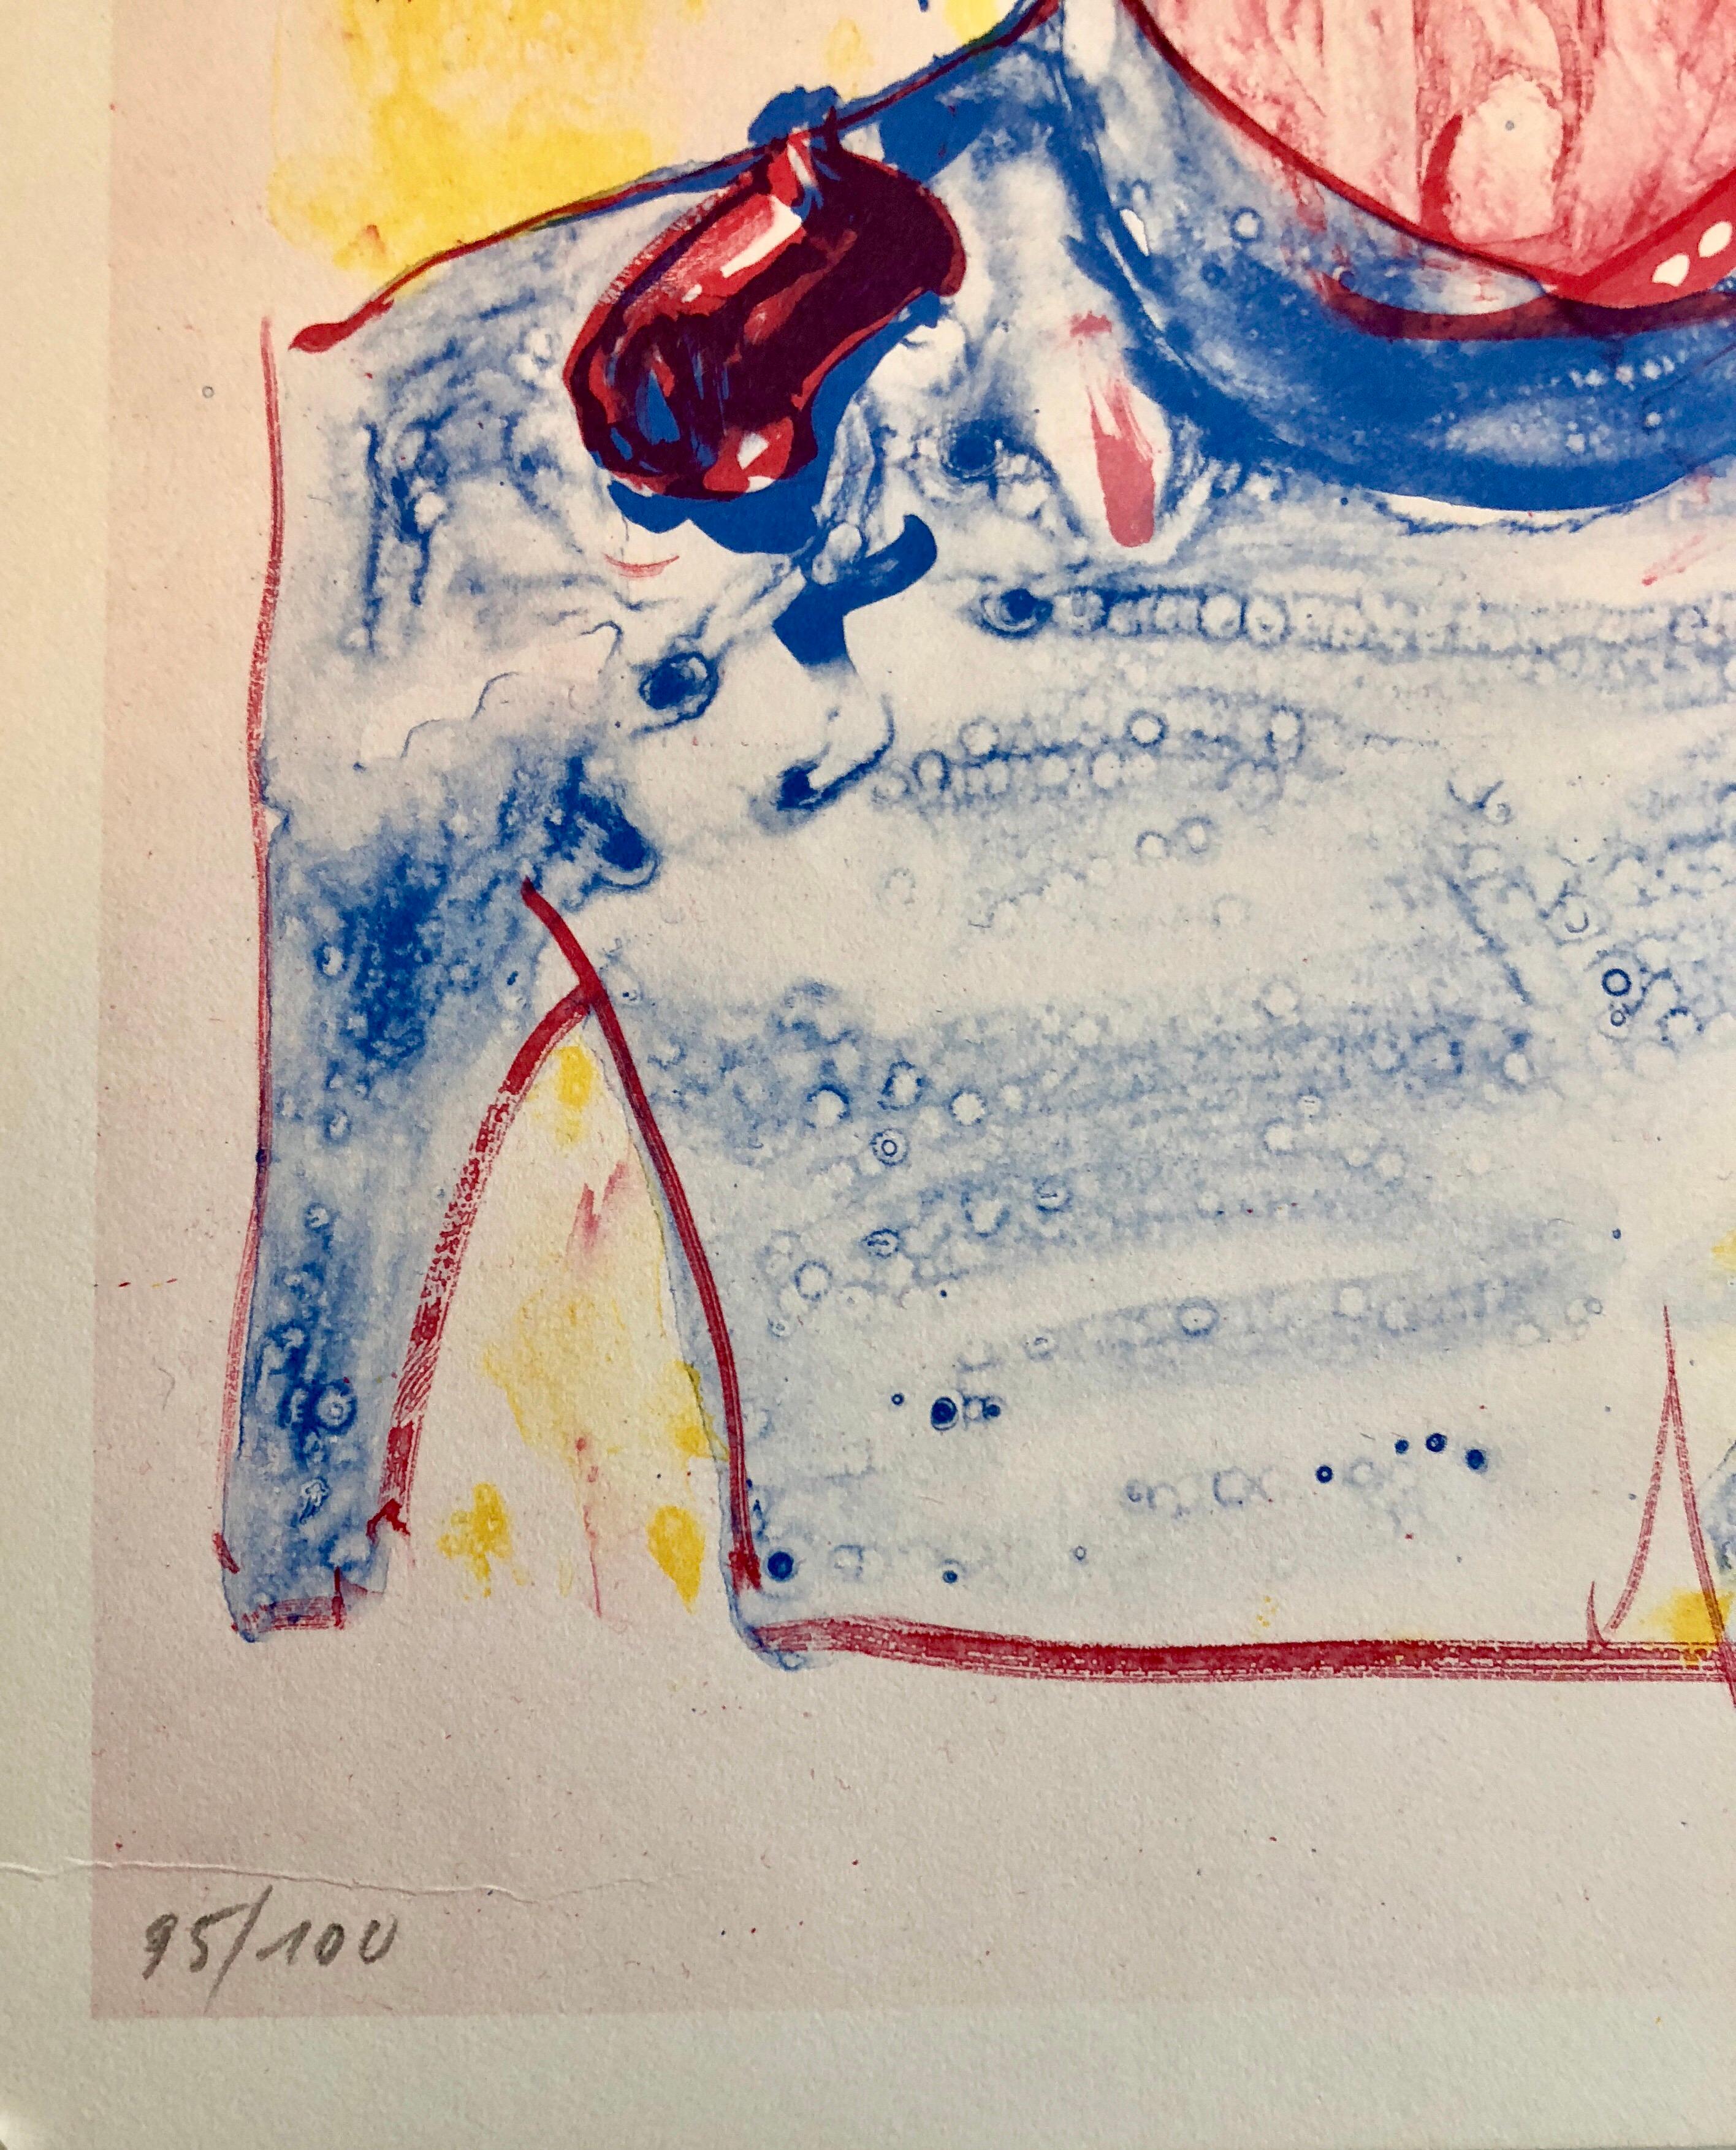 This one is untitled and depicts a portrait of a young woman in yellow, red and blue with a Maryan like quality to it. 
Published by  Edition Hansjörg Mayer, Stuttgart They published concrete poetry and art books by  Mark Boyle, Richard Hamilton,